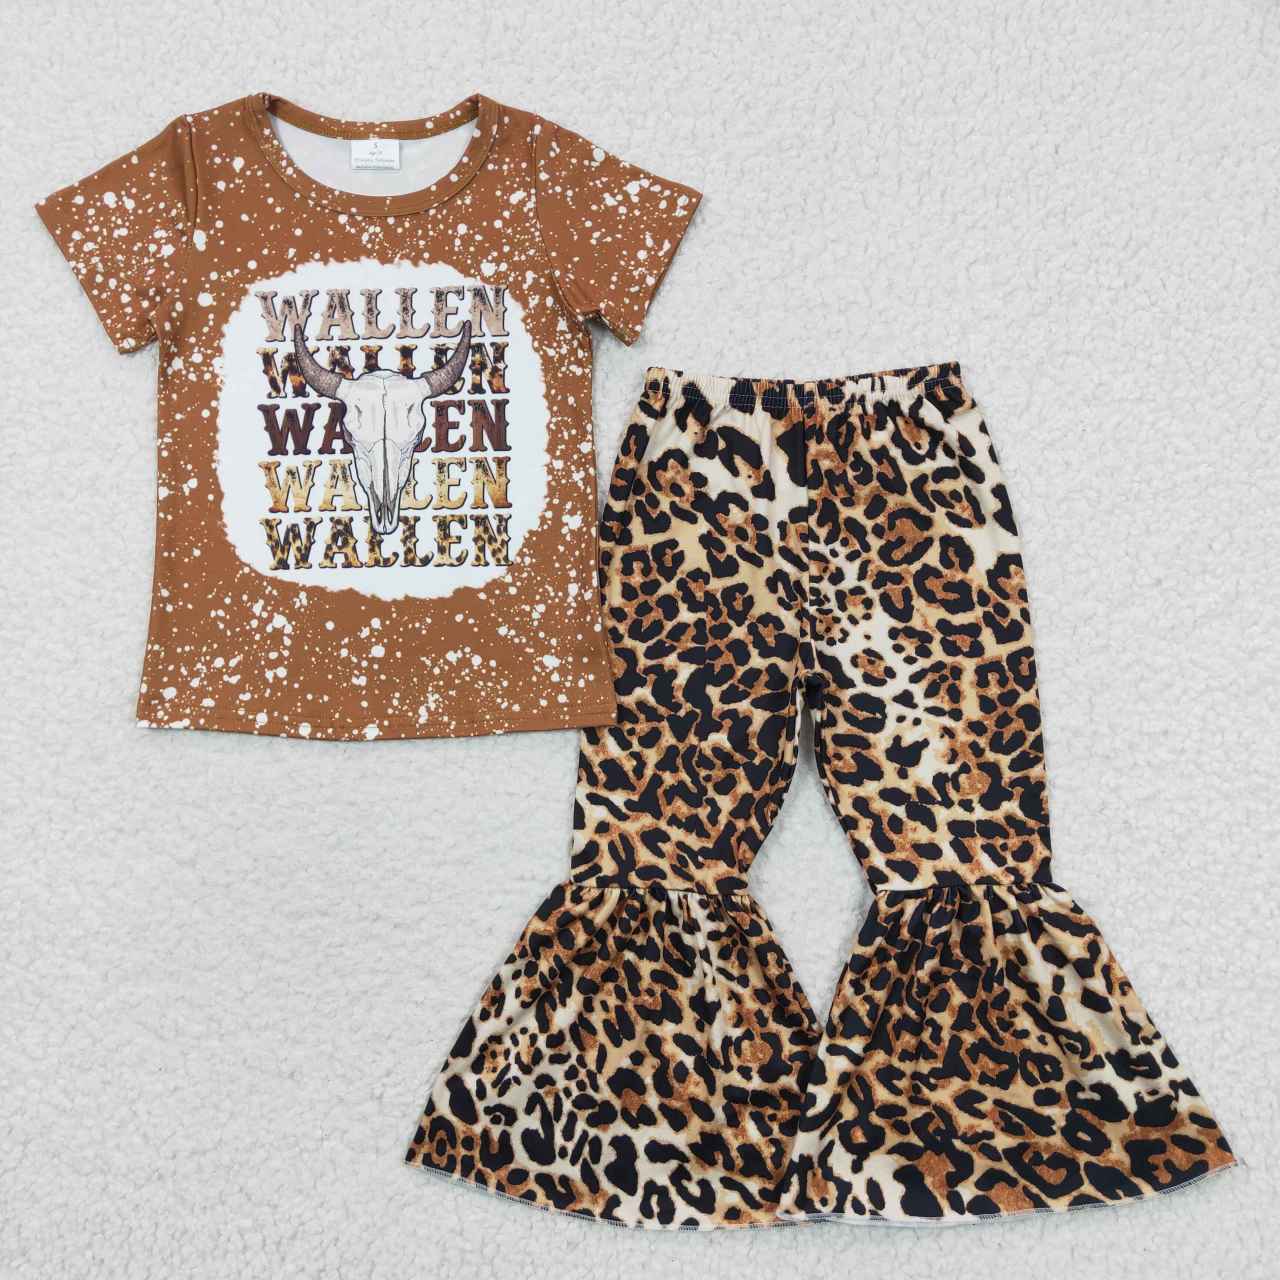 GSPO0592 kids clothes girls leopard wallen cow girl bell bottom outfit spring fall set